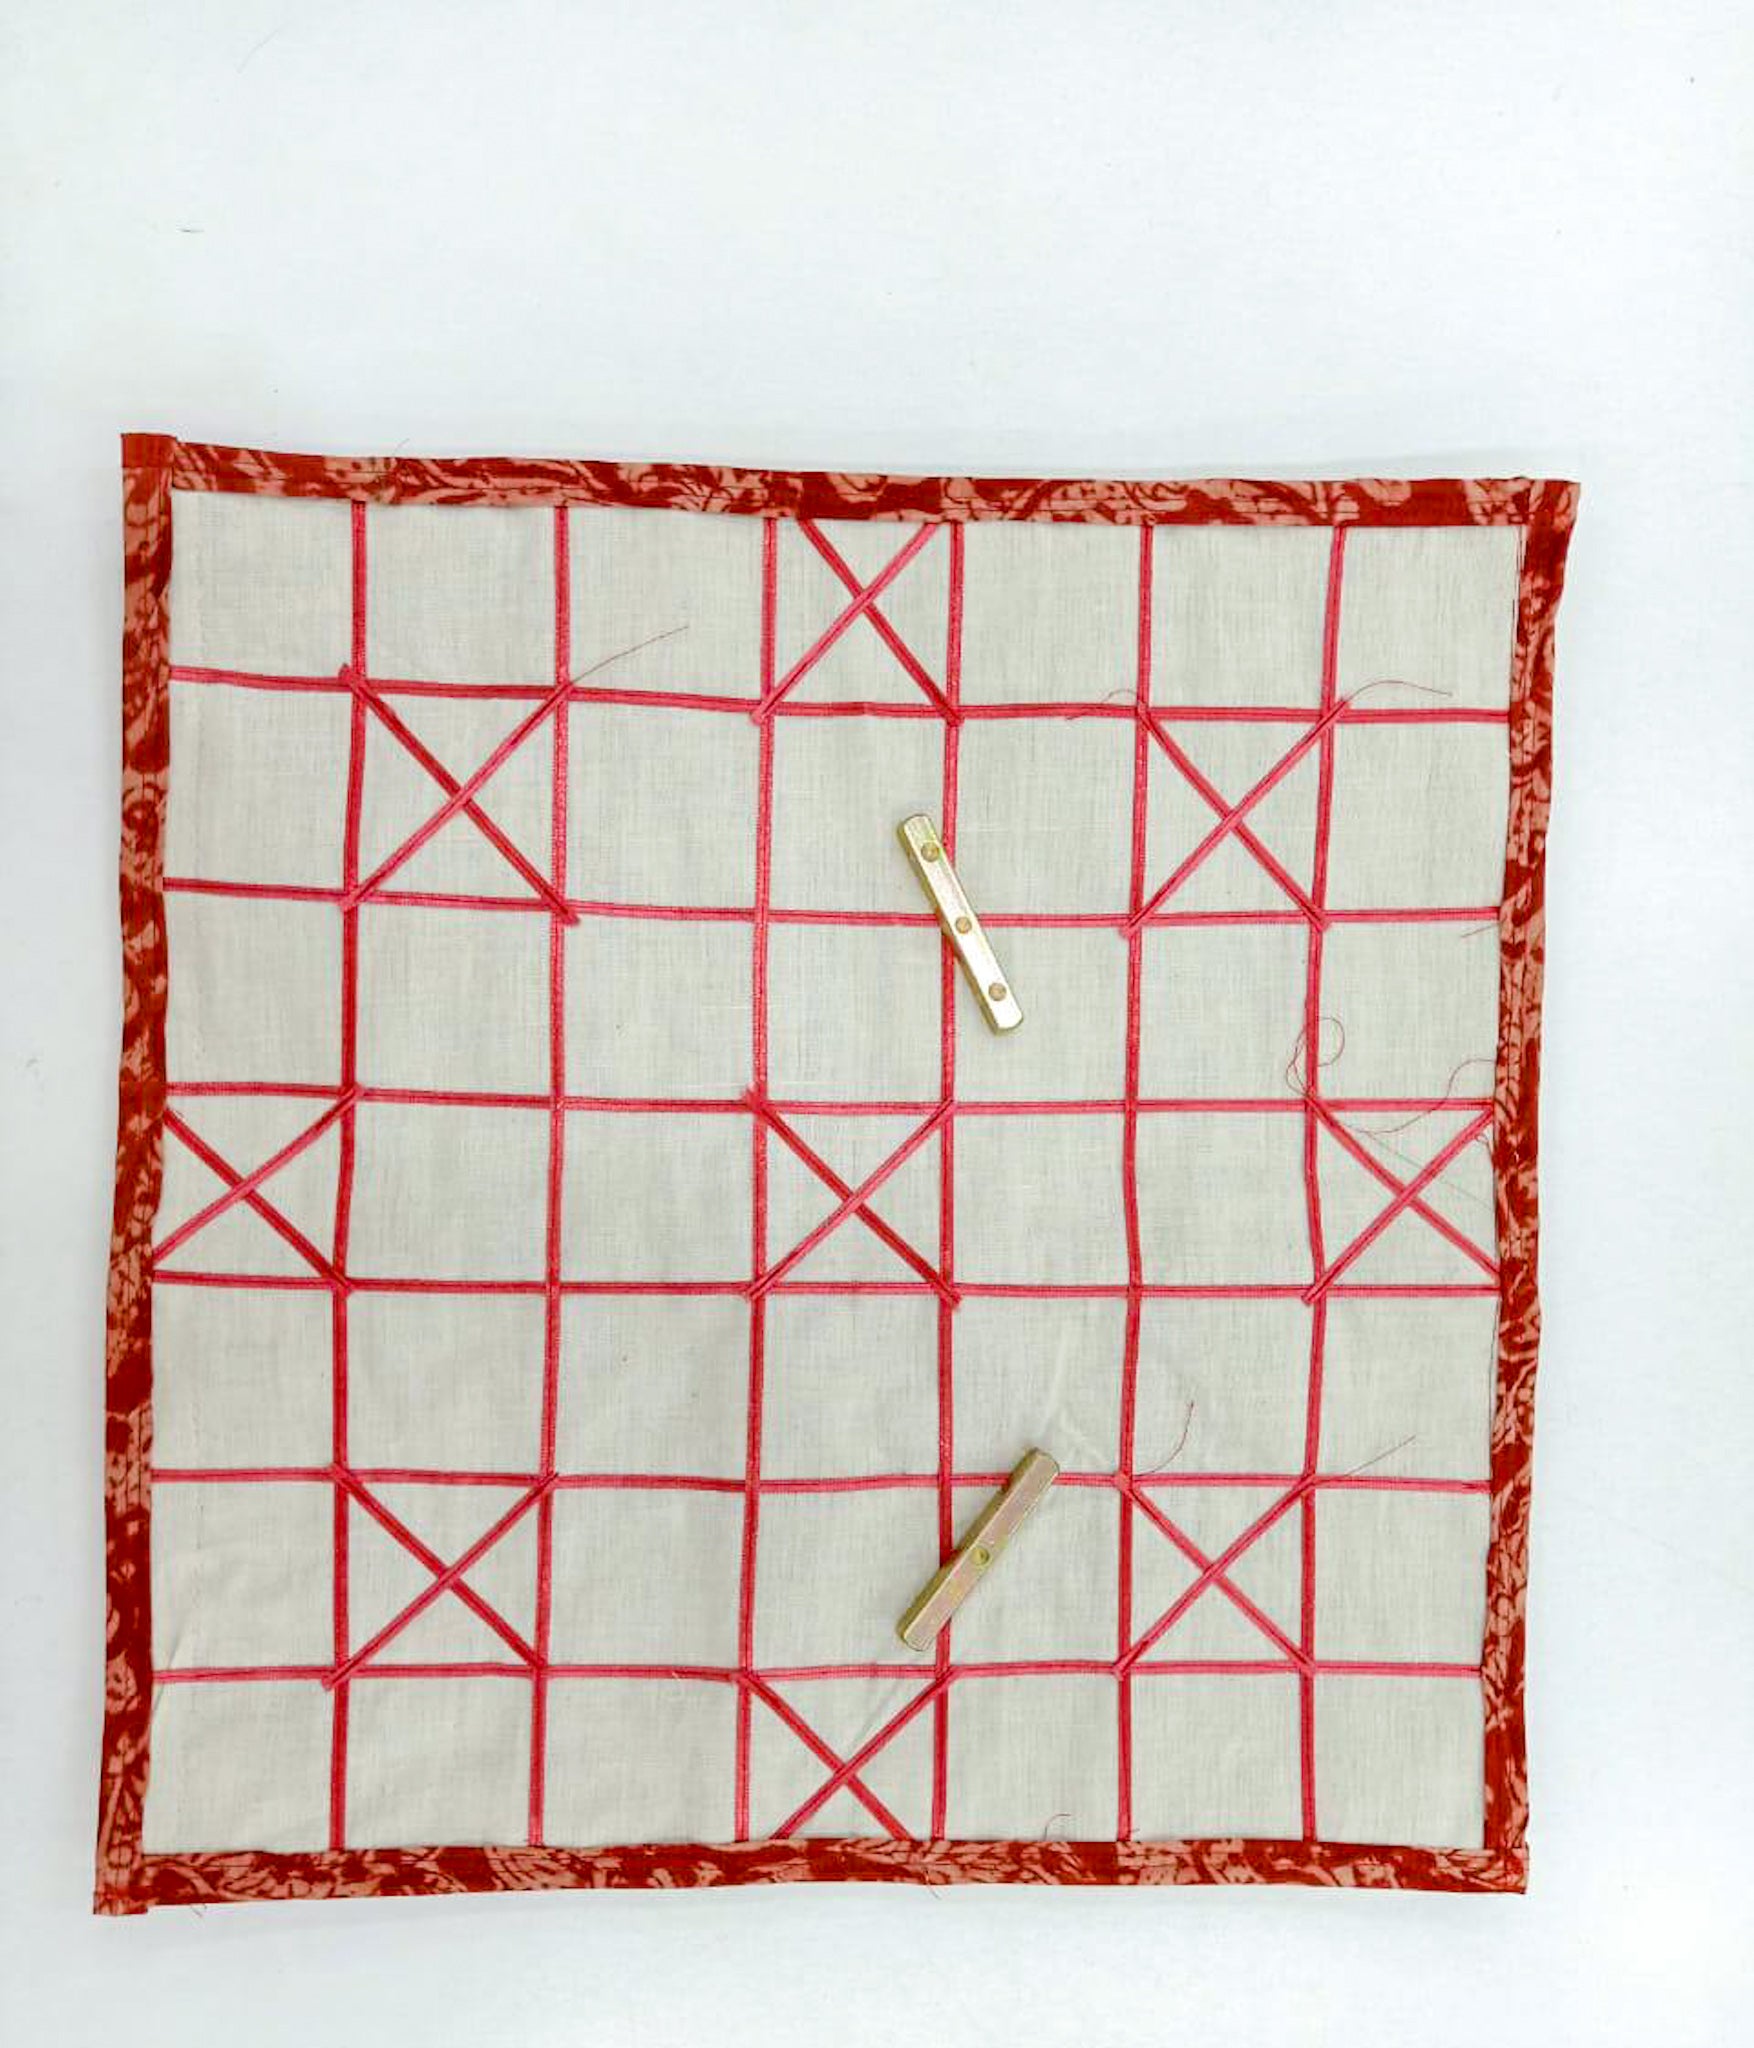 Dhayam / Chausar / Pachisi Cloth Game Board With Brass Thayakkattai and Wooden Coins